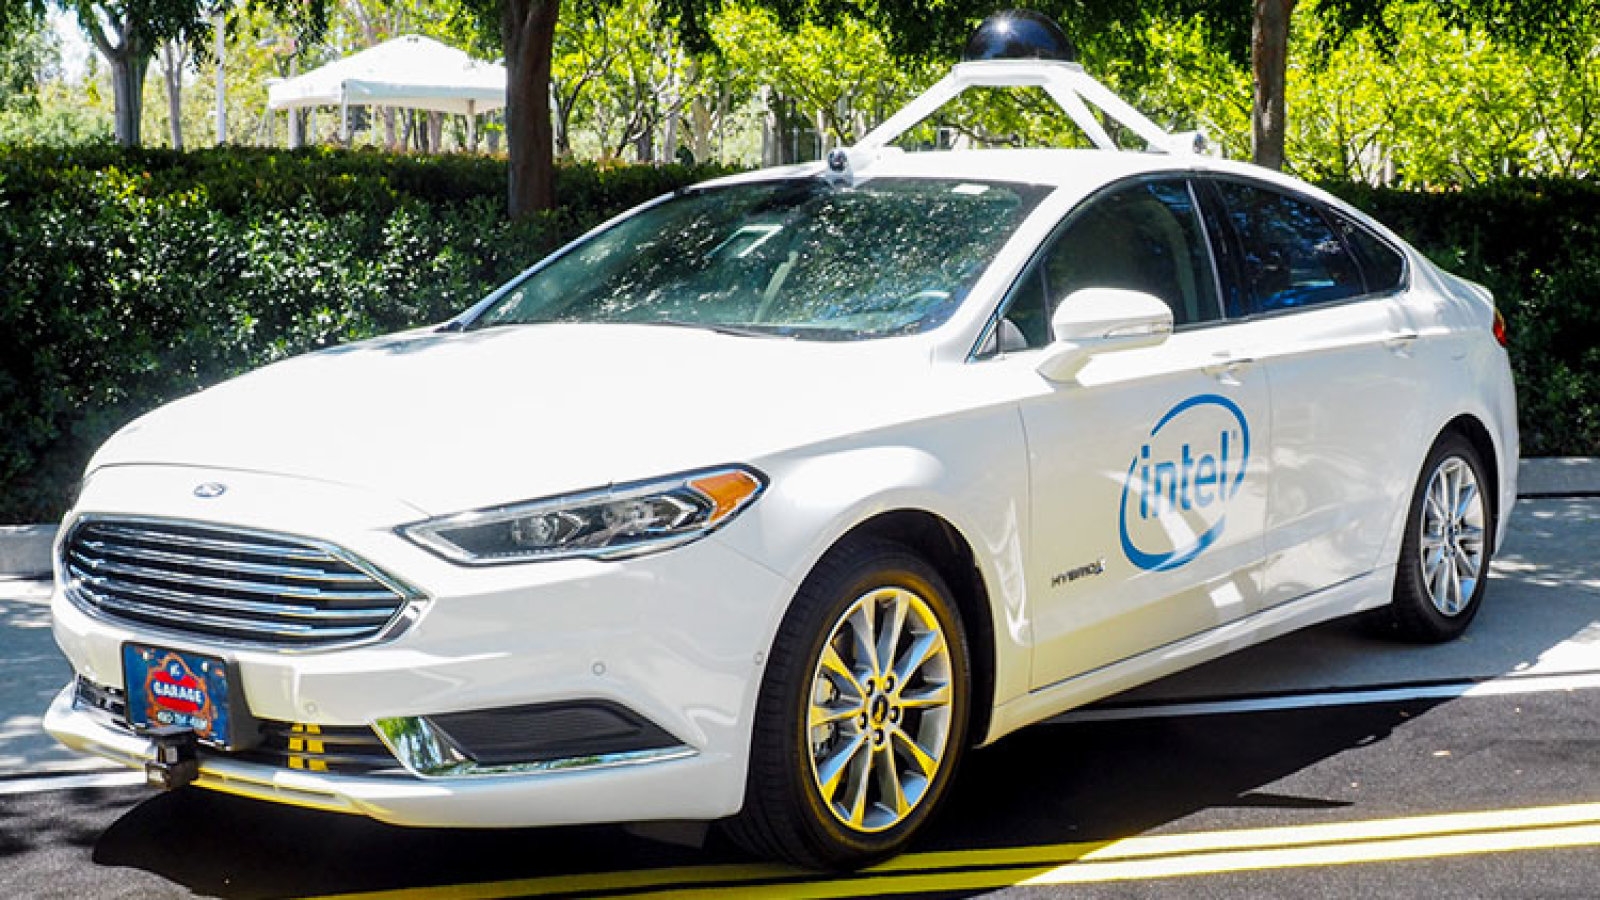 Intel proposes a mathematical formula for self-driving car safety | DeviceDaily.com